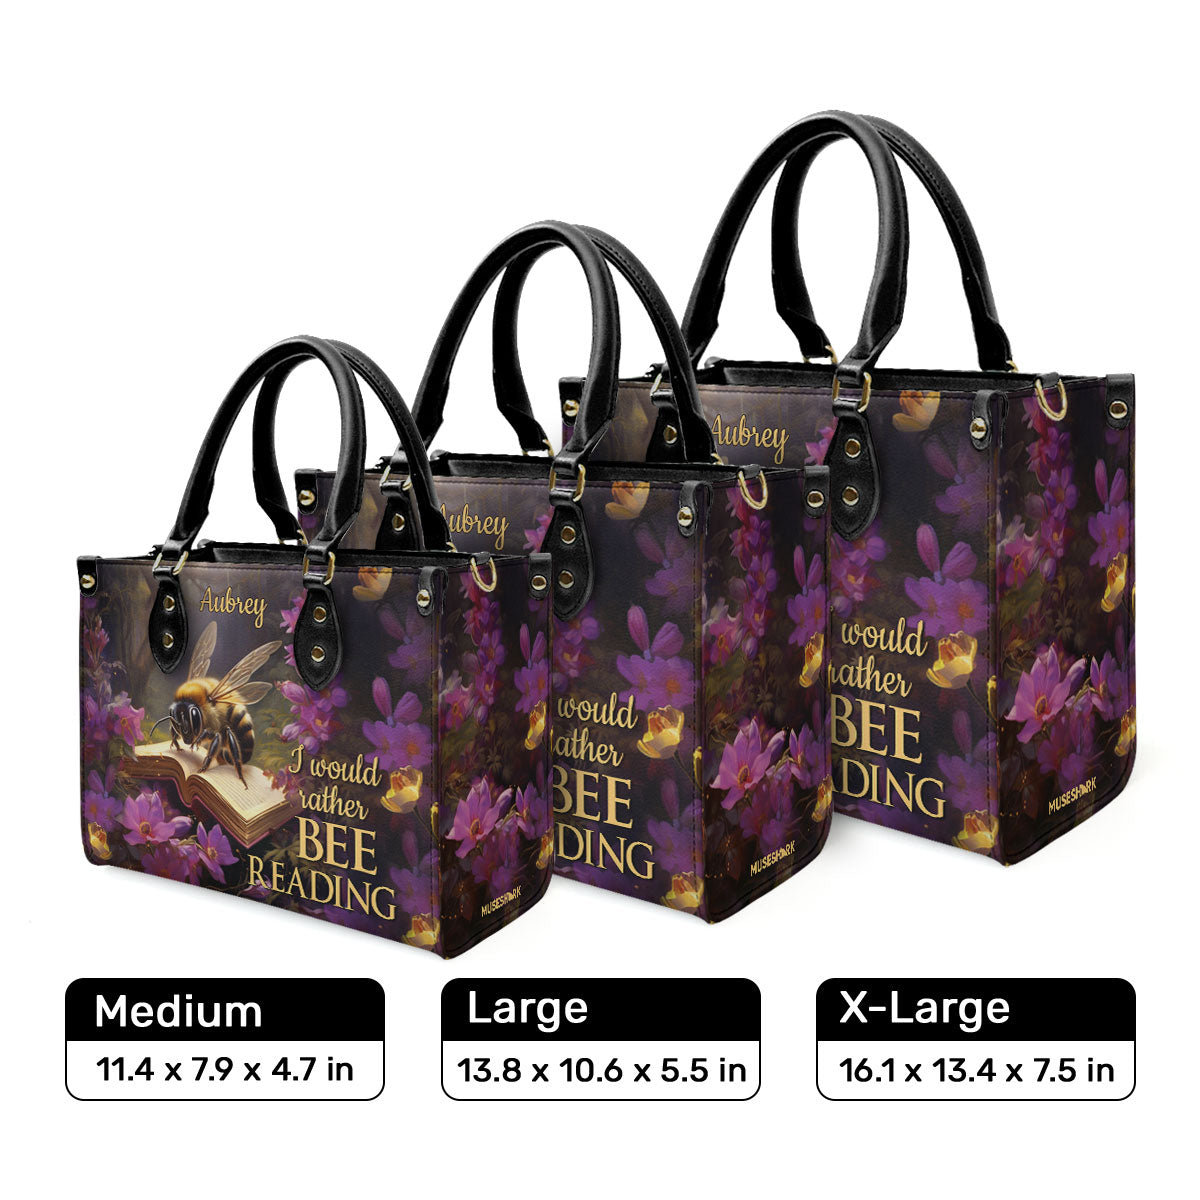 I Would Rather Bee Reading - Personalized Leather Handbag MS-NH1623